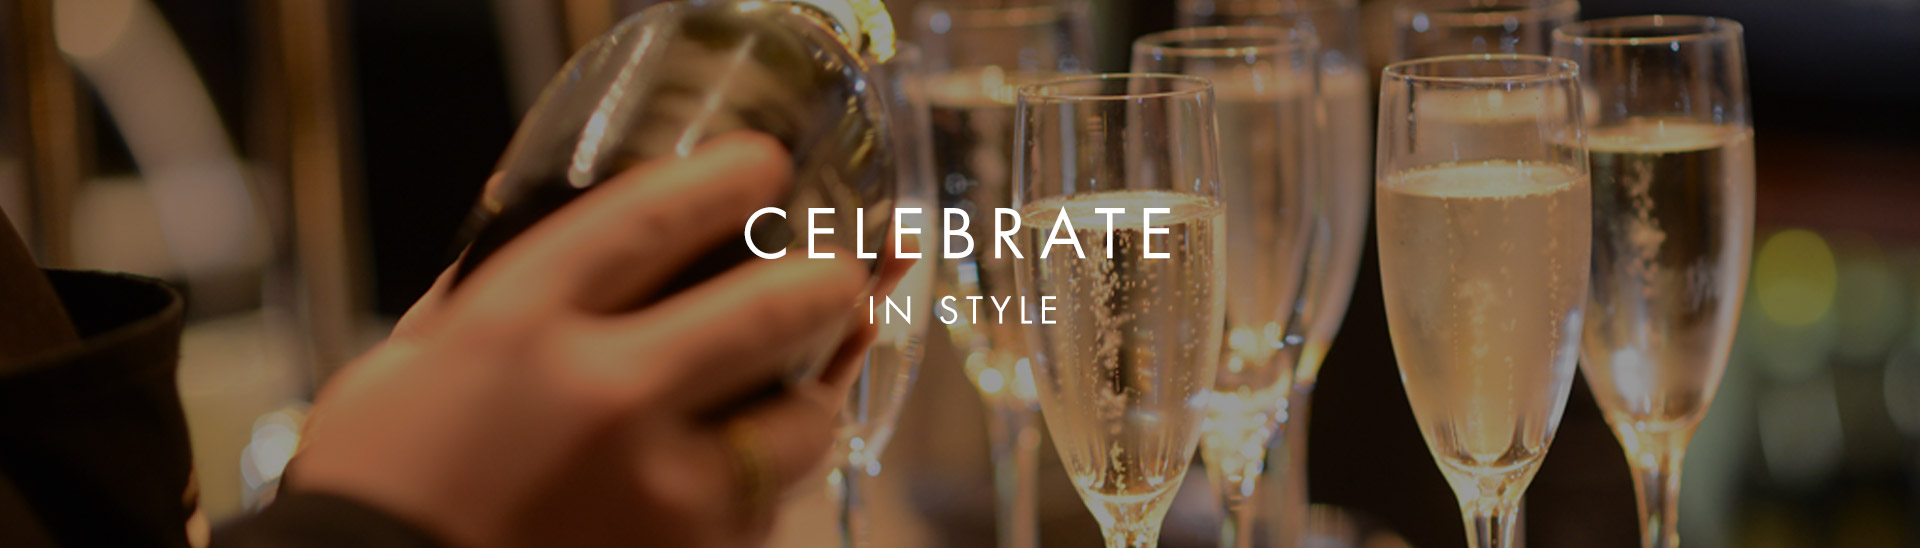 Celebrate in style at Miller & Carter